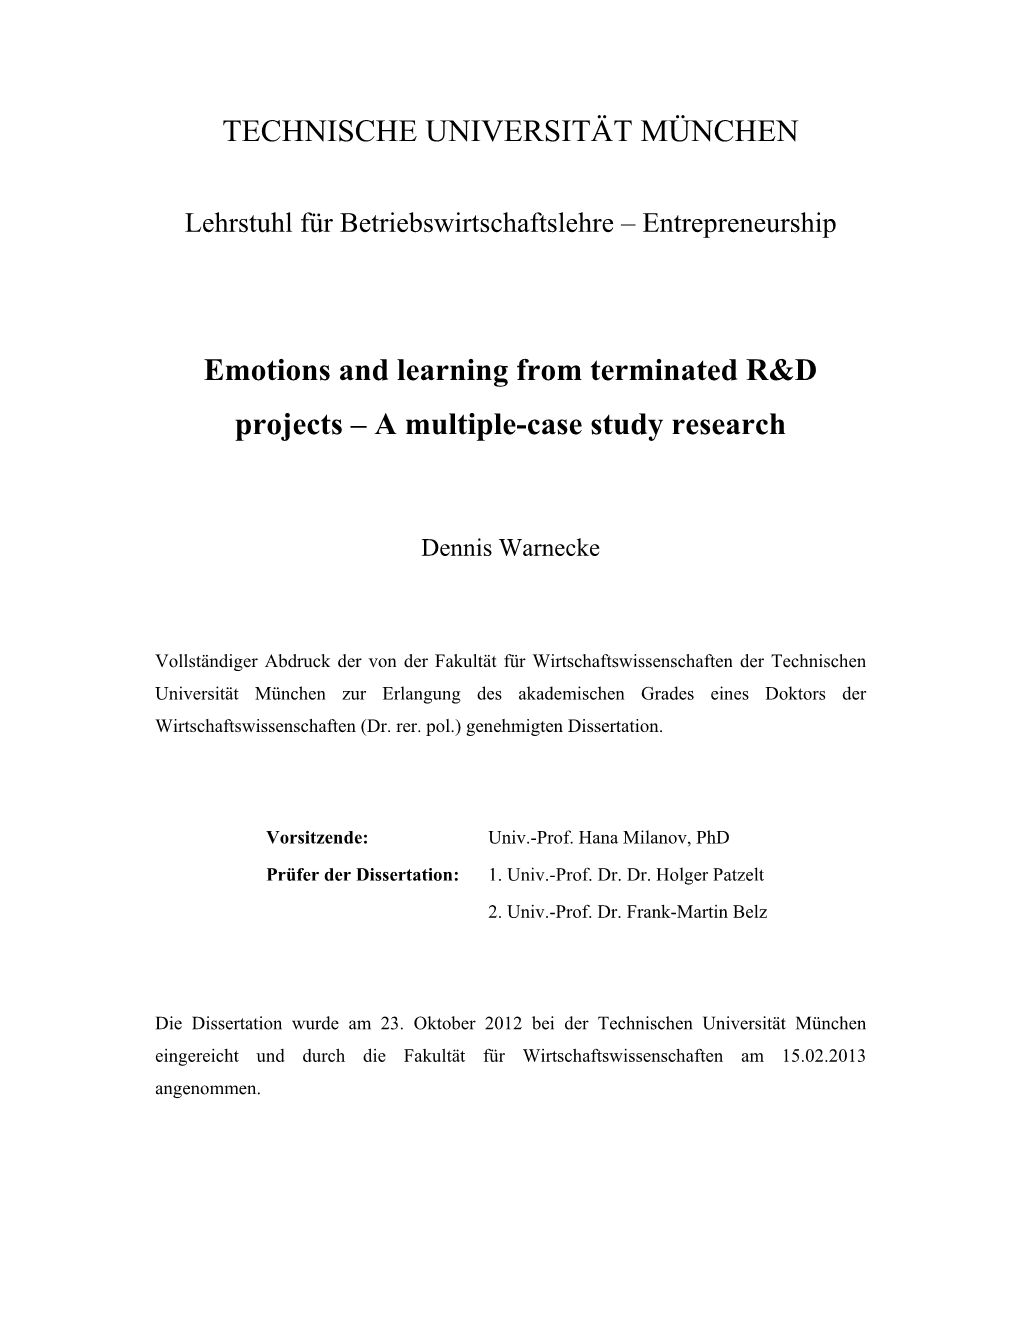 Emotions and Learning from Terminated R&D Projects–A Multiple